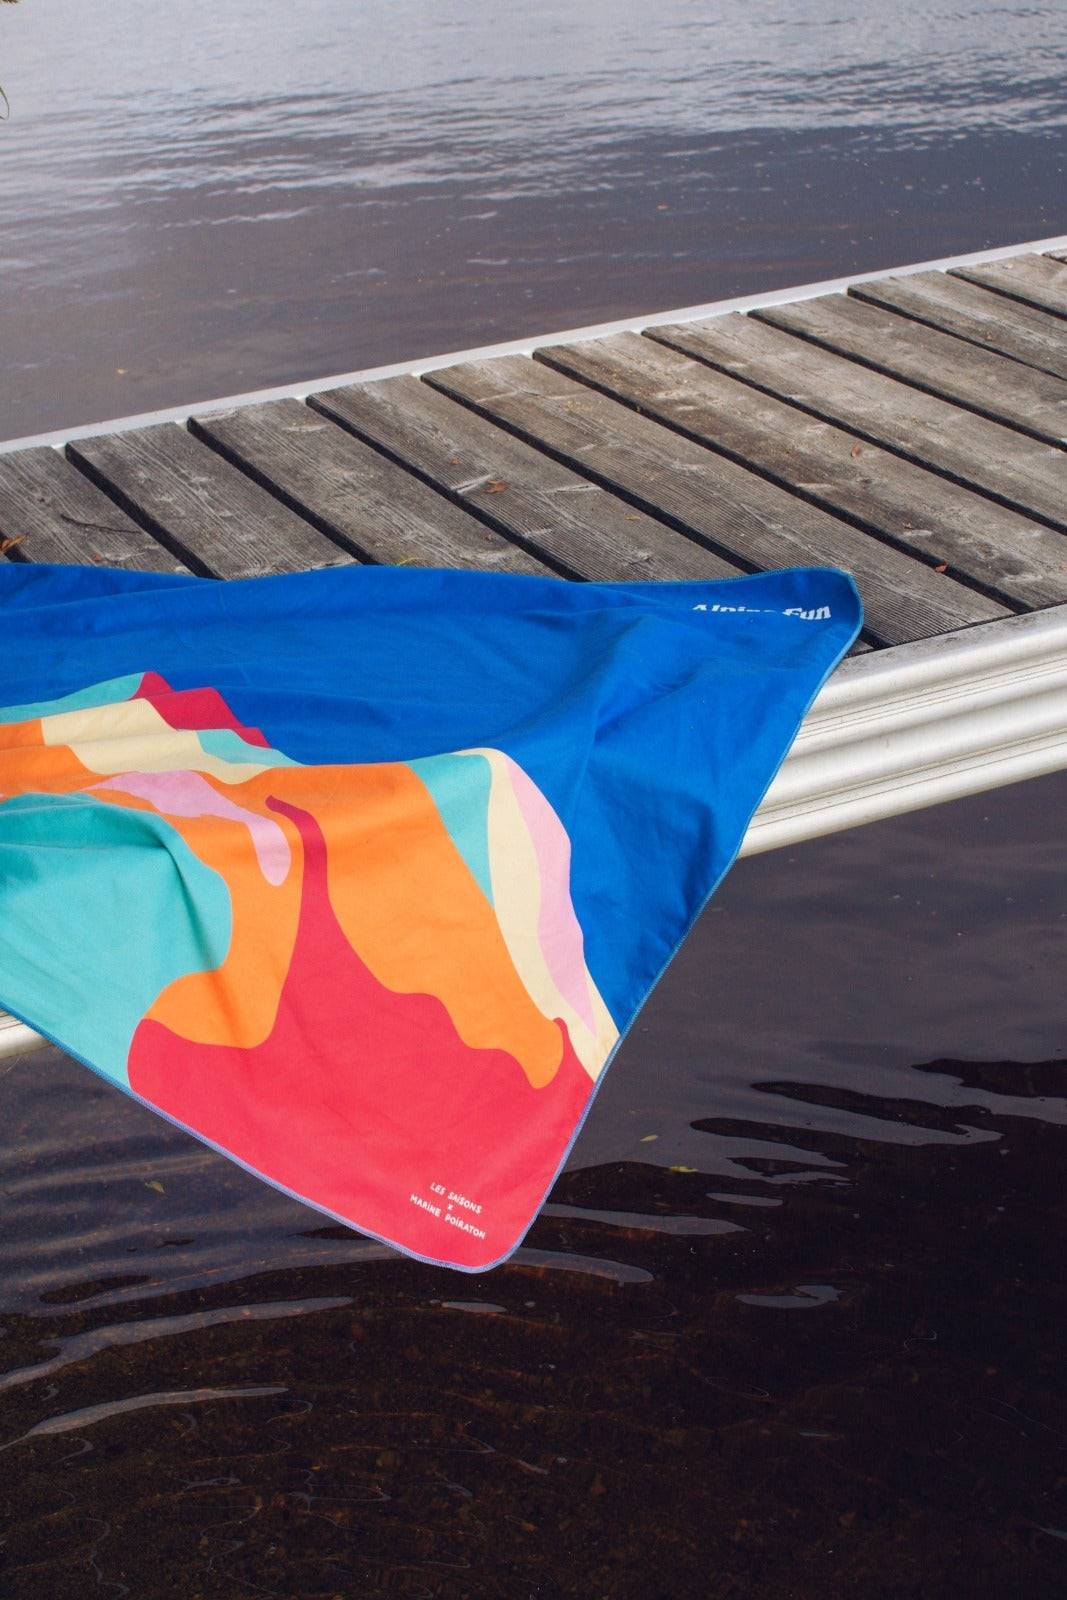 microfiber towel made in quebec, colorful and artist series by Marine Poiraton